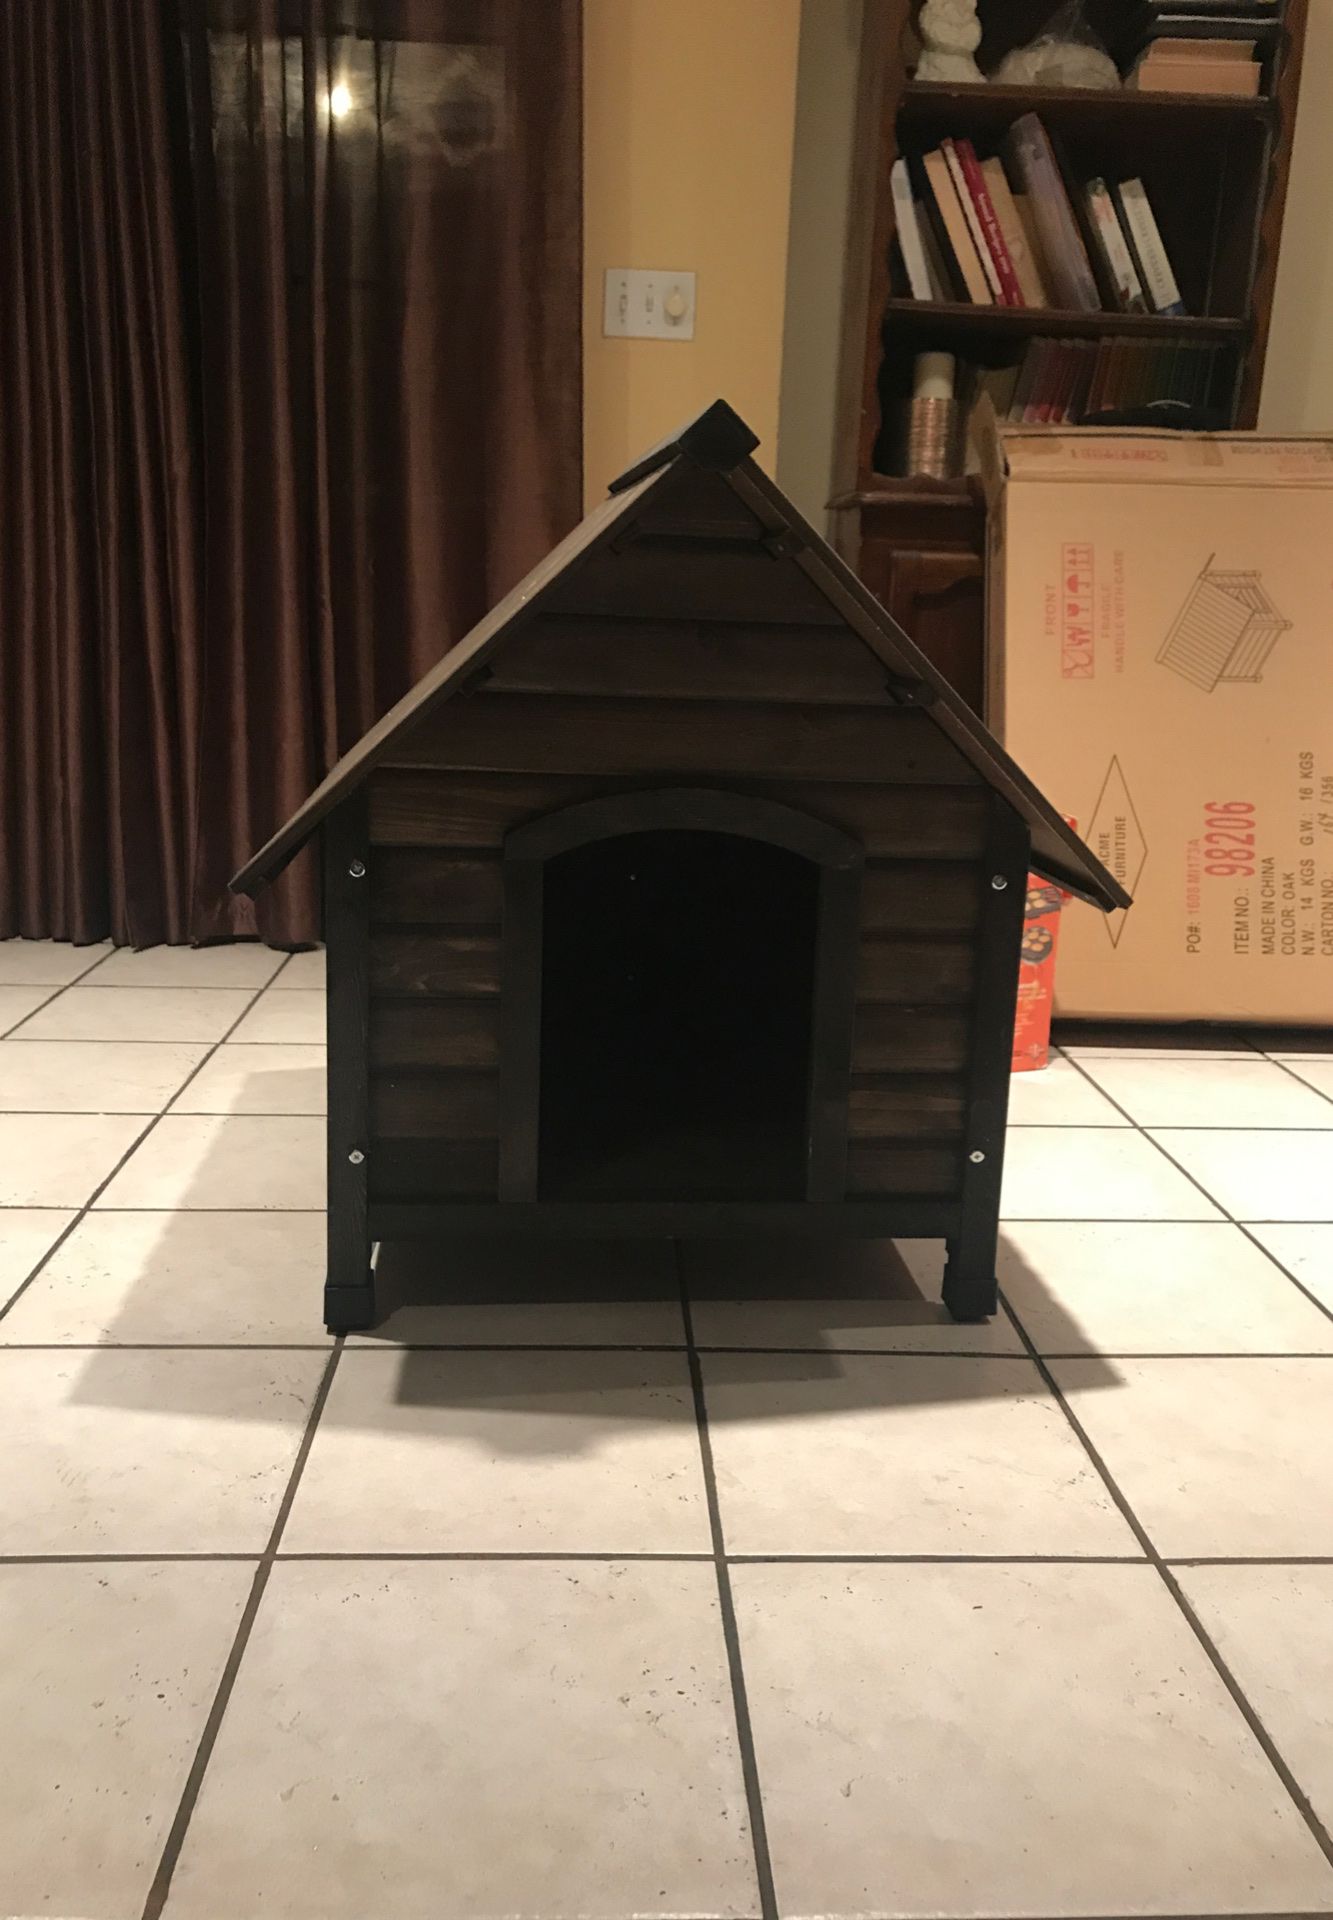 Brand new small dog house